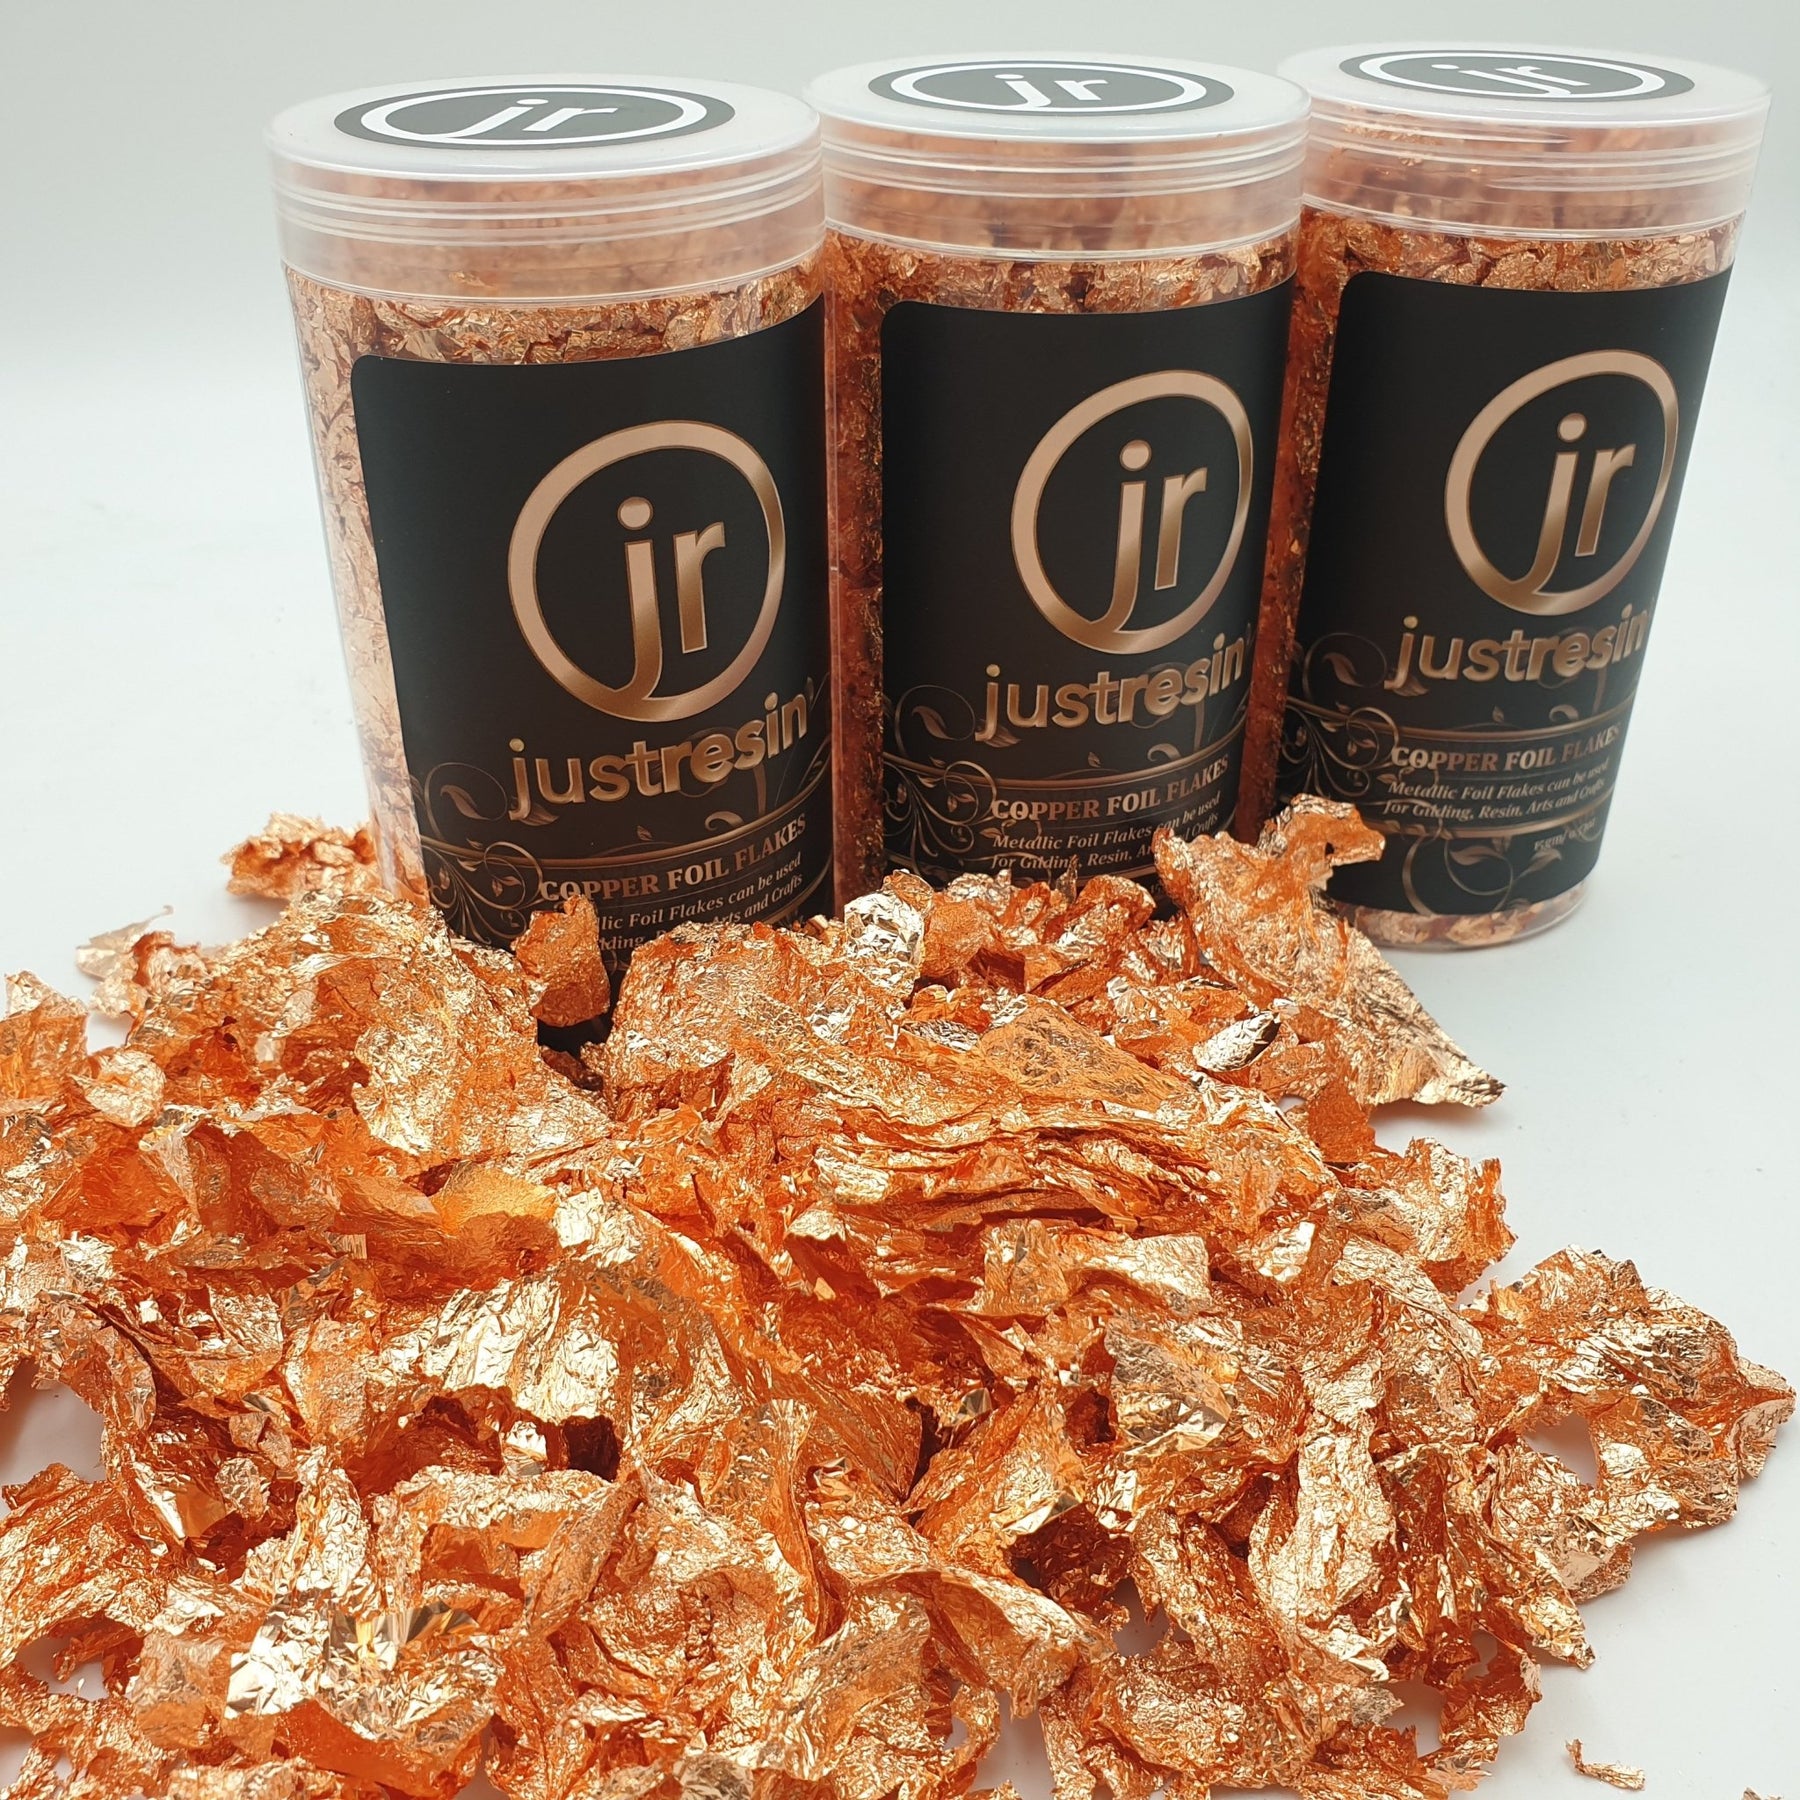 Copper Foil Flakes – New Classic Resin